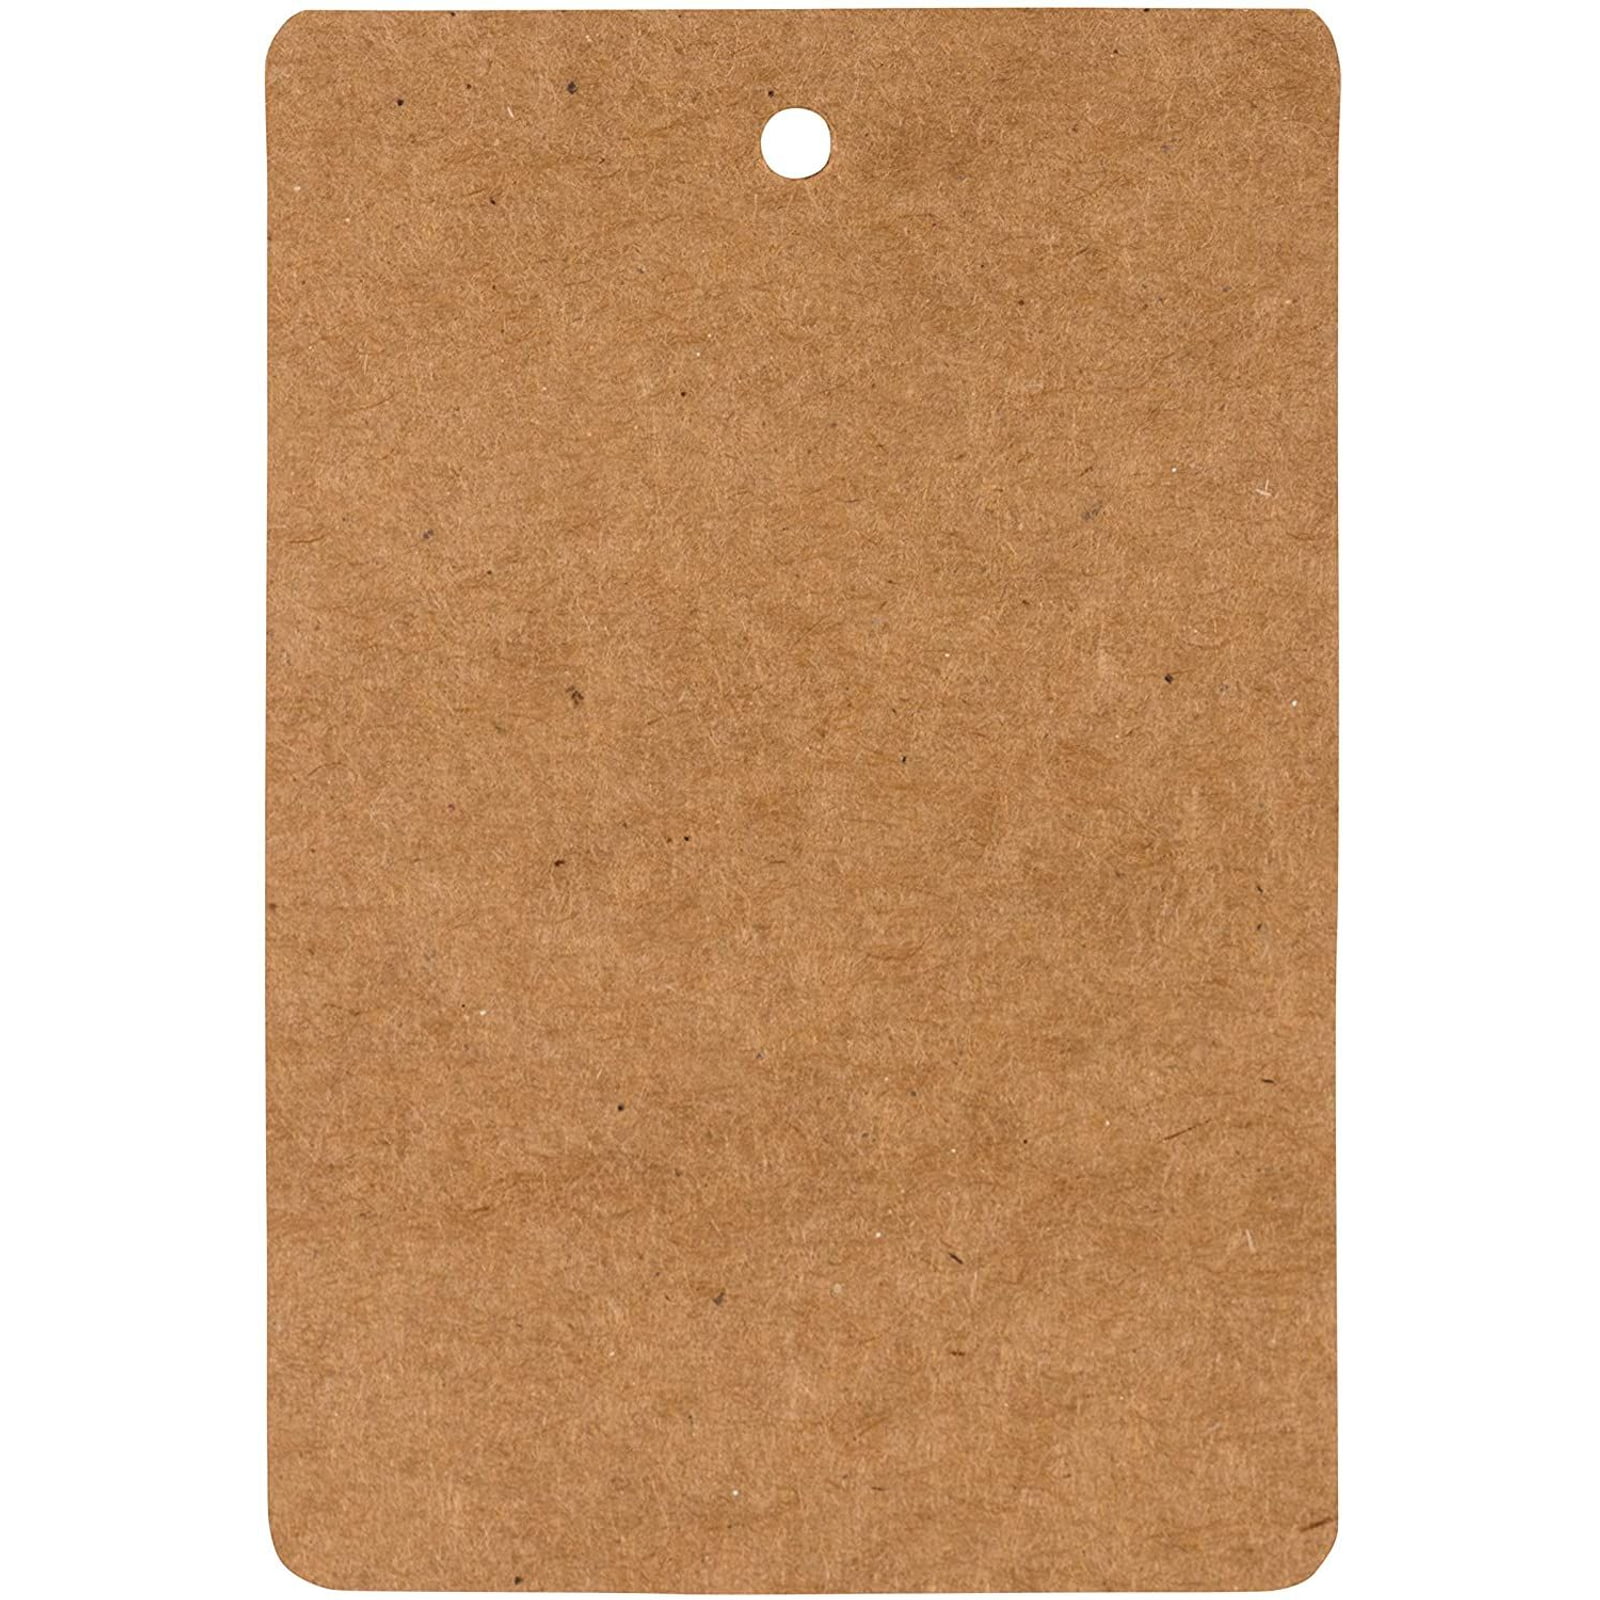 string 200 unstrung rustic Brown 85lb card stock retail price tags gift tags 